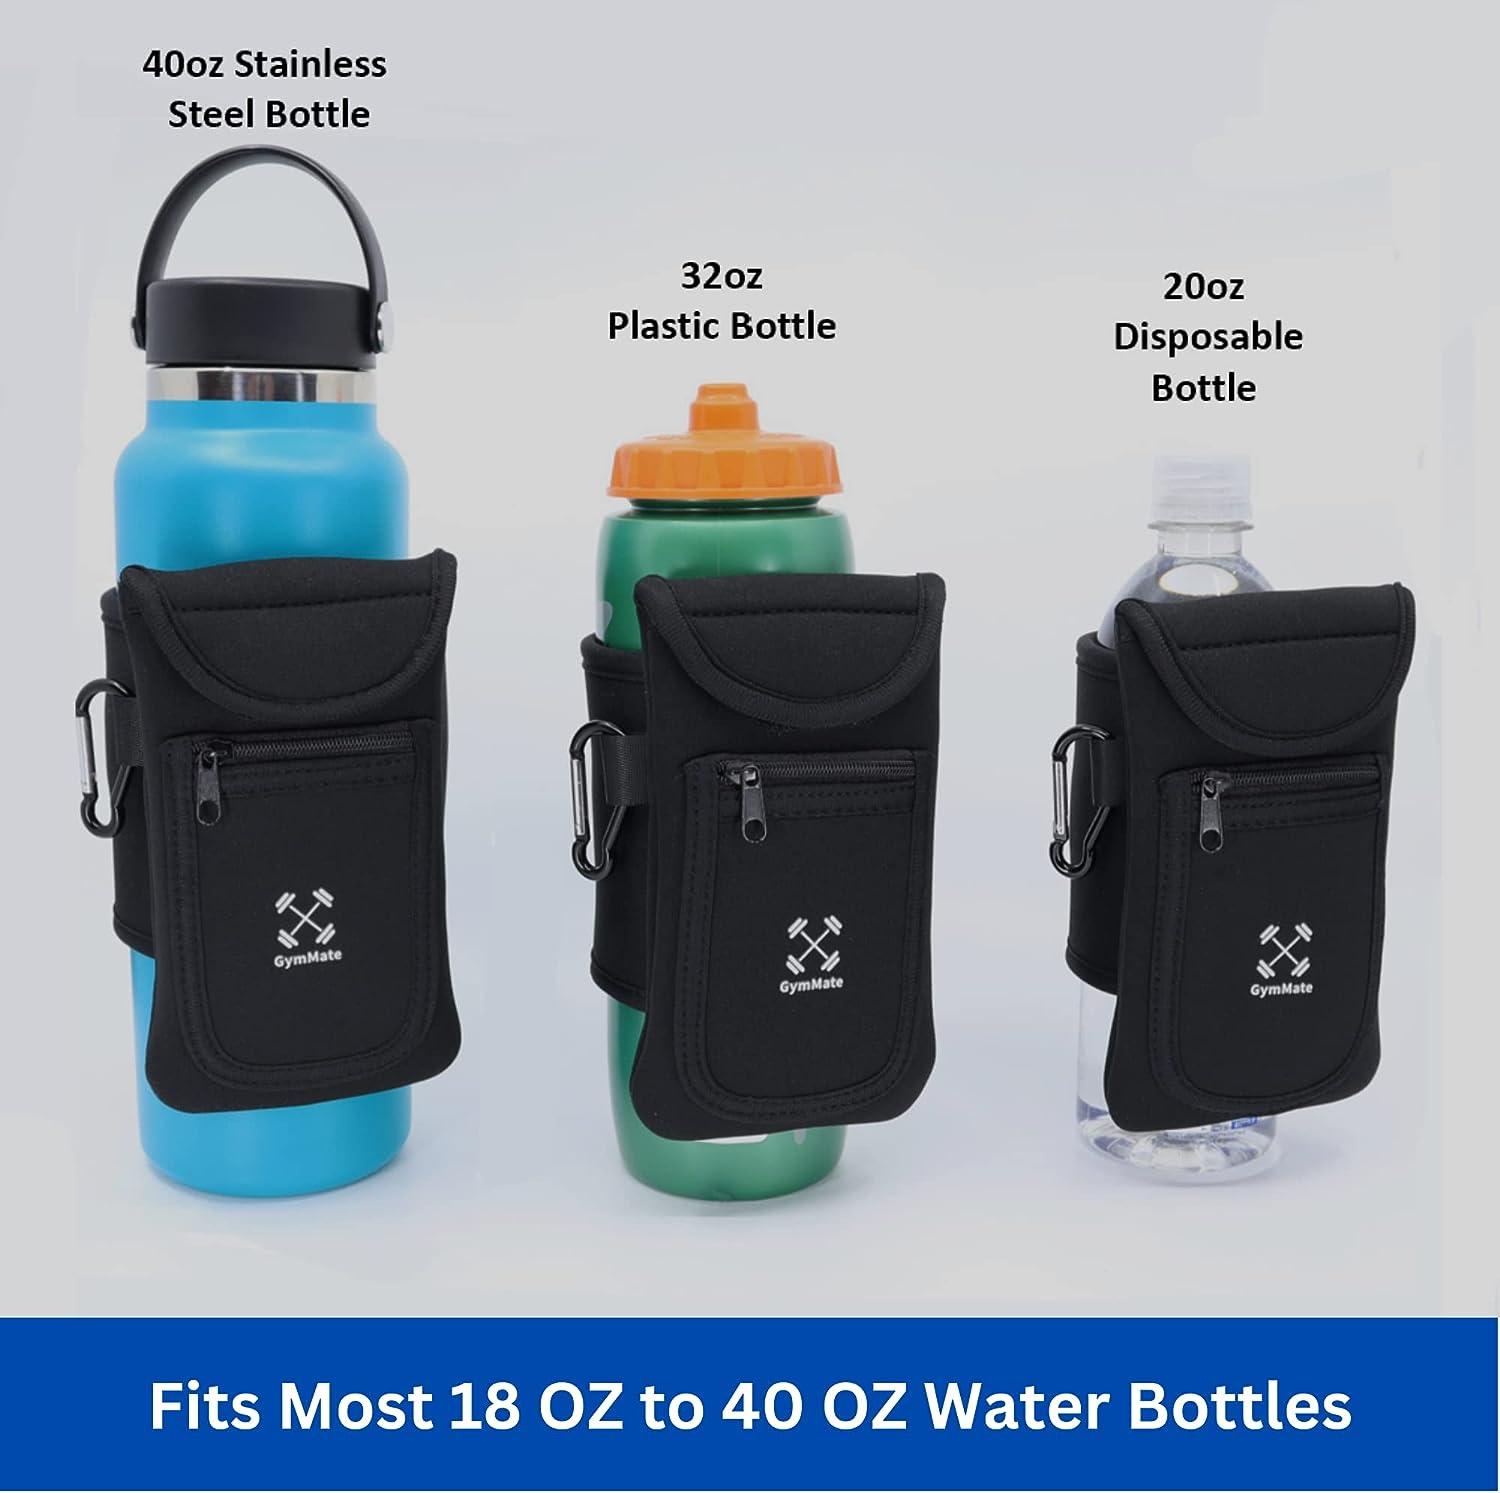 Gym Mate Magnetic Water Bottle Sleeve Pouch. Attaches Magnetically